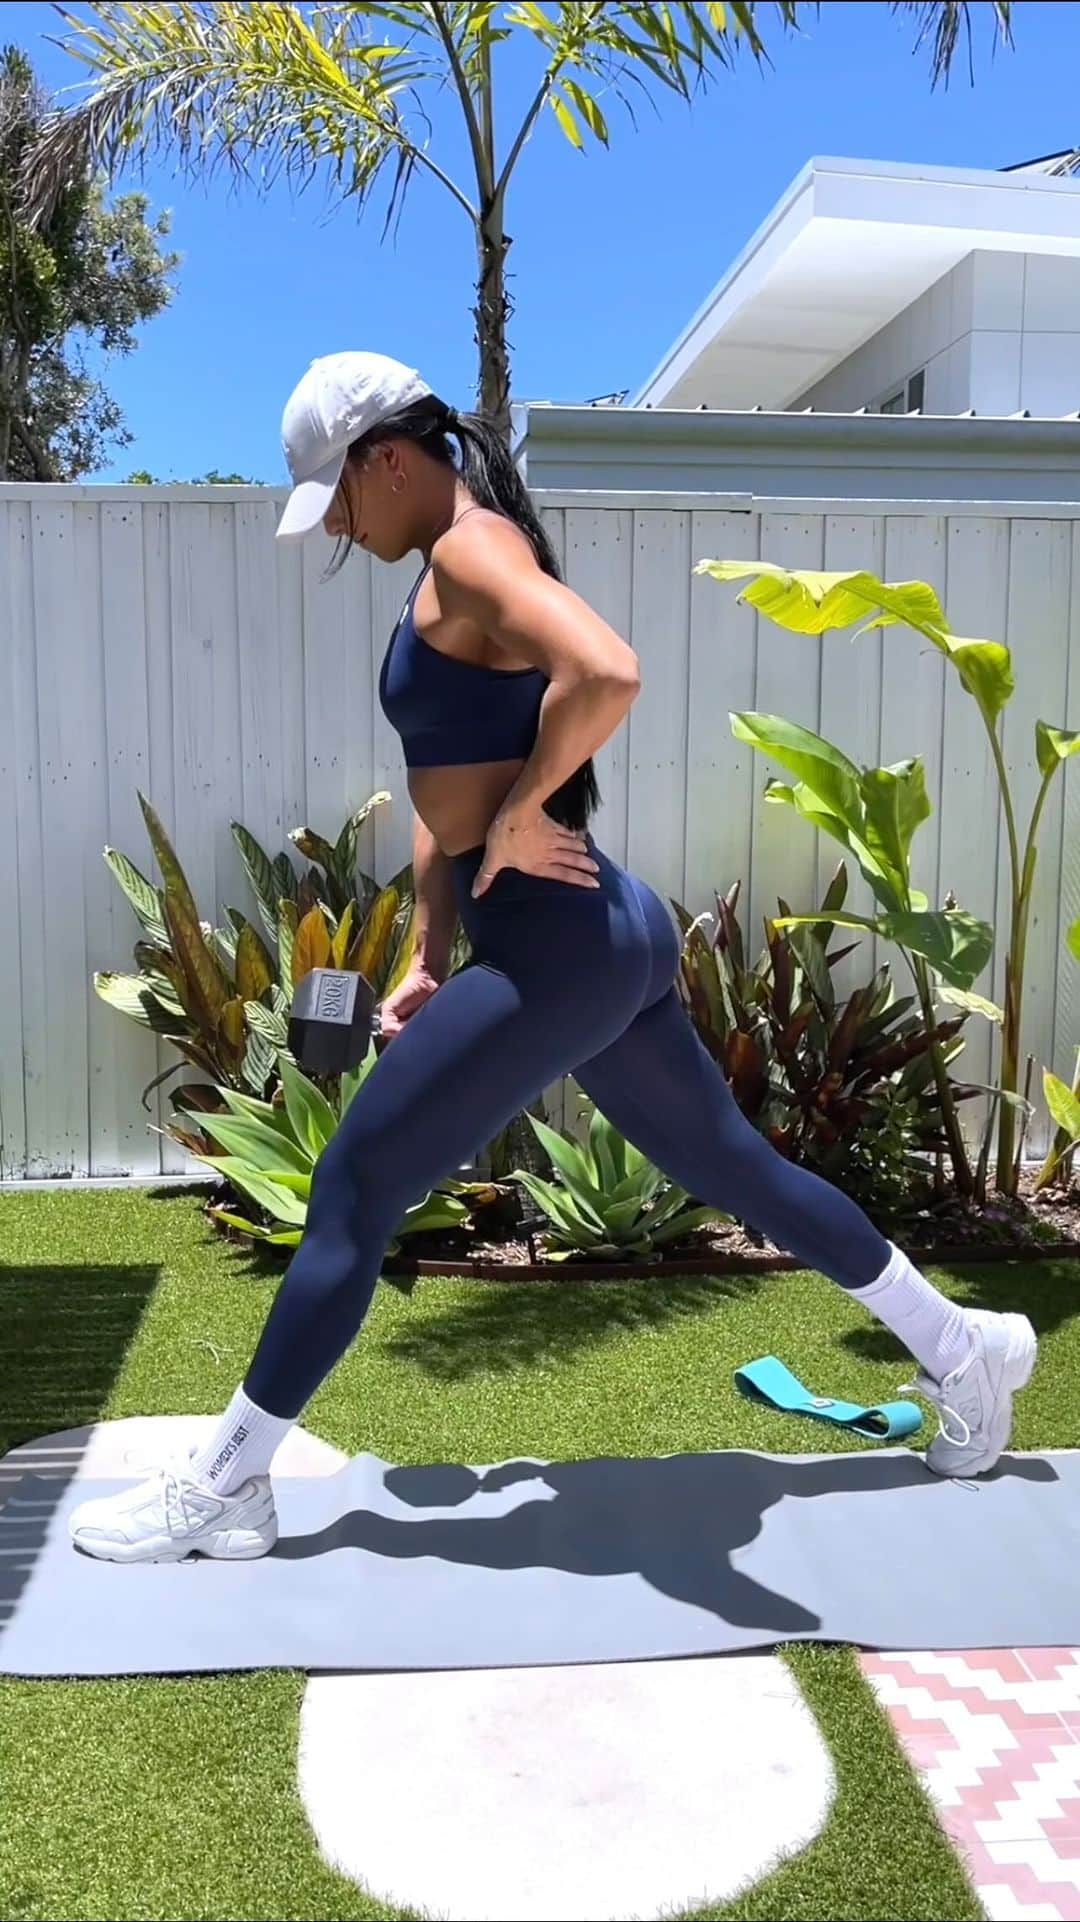 Danielle Robertsonのインスタグラム：「HOME DUMBBELL + BAND WORKOUT LOWER BODY WORKOUT!! (sorry for yelling)  Here’s a spicyyyy and effective workout you can do anywhere! Wearing @womensbest Essential collection leggings & Power Seamless sports bra!  Reminder that @womensbest currently has up to 70% off!! So get amongstt it  WORKOUT  3 SETS   15 x Squats  15 x Glute Bridges  20 x Glute Bridge Pulses 20 x Seated Abduction   15 x Straight Leg Raises (each leg)  12 x RDLs 10 x Split Squats (each leg)」